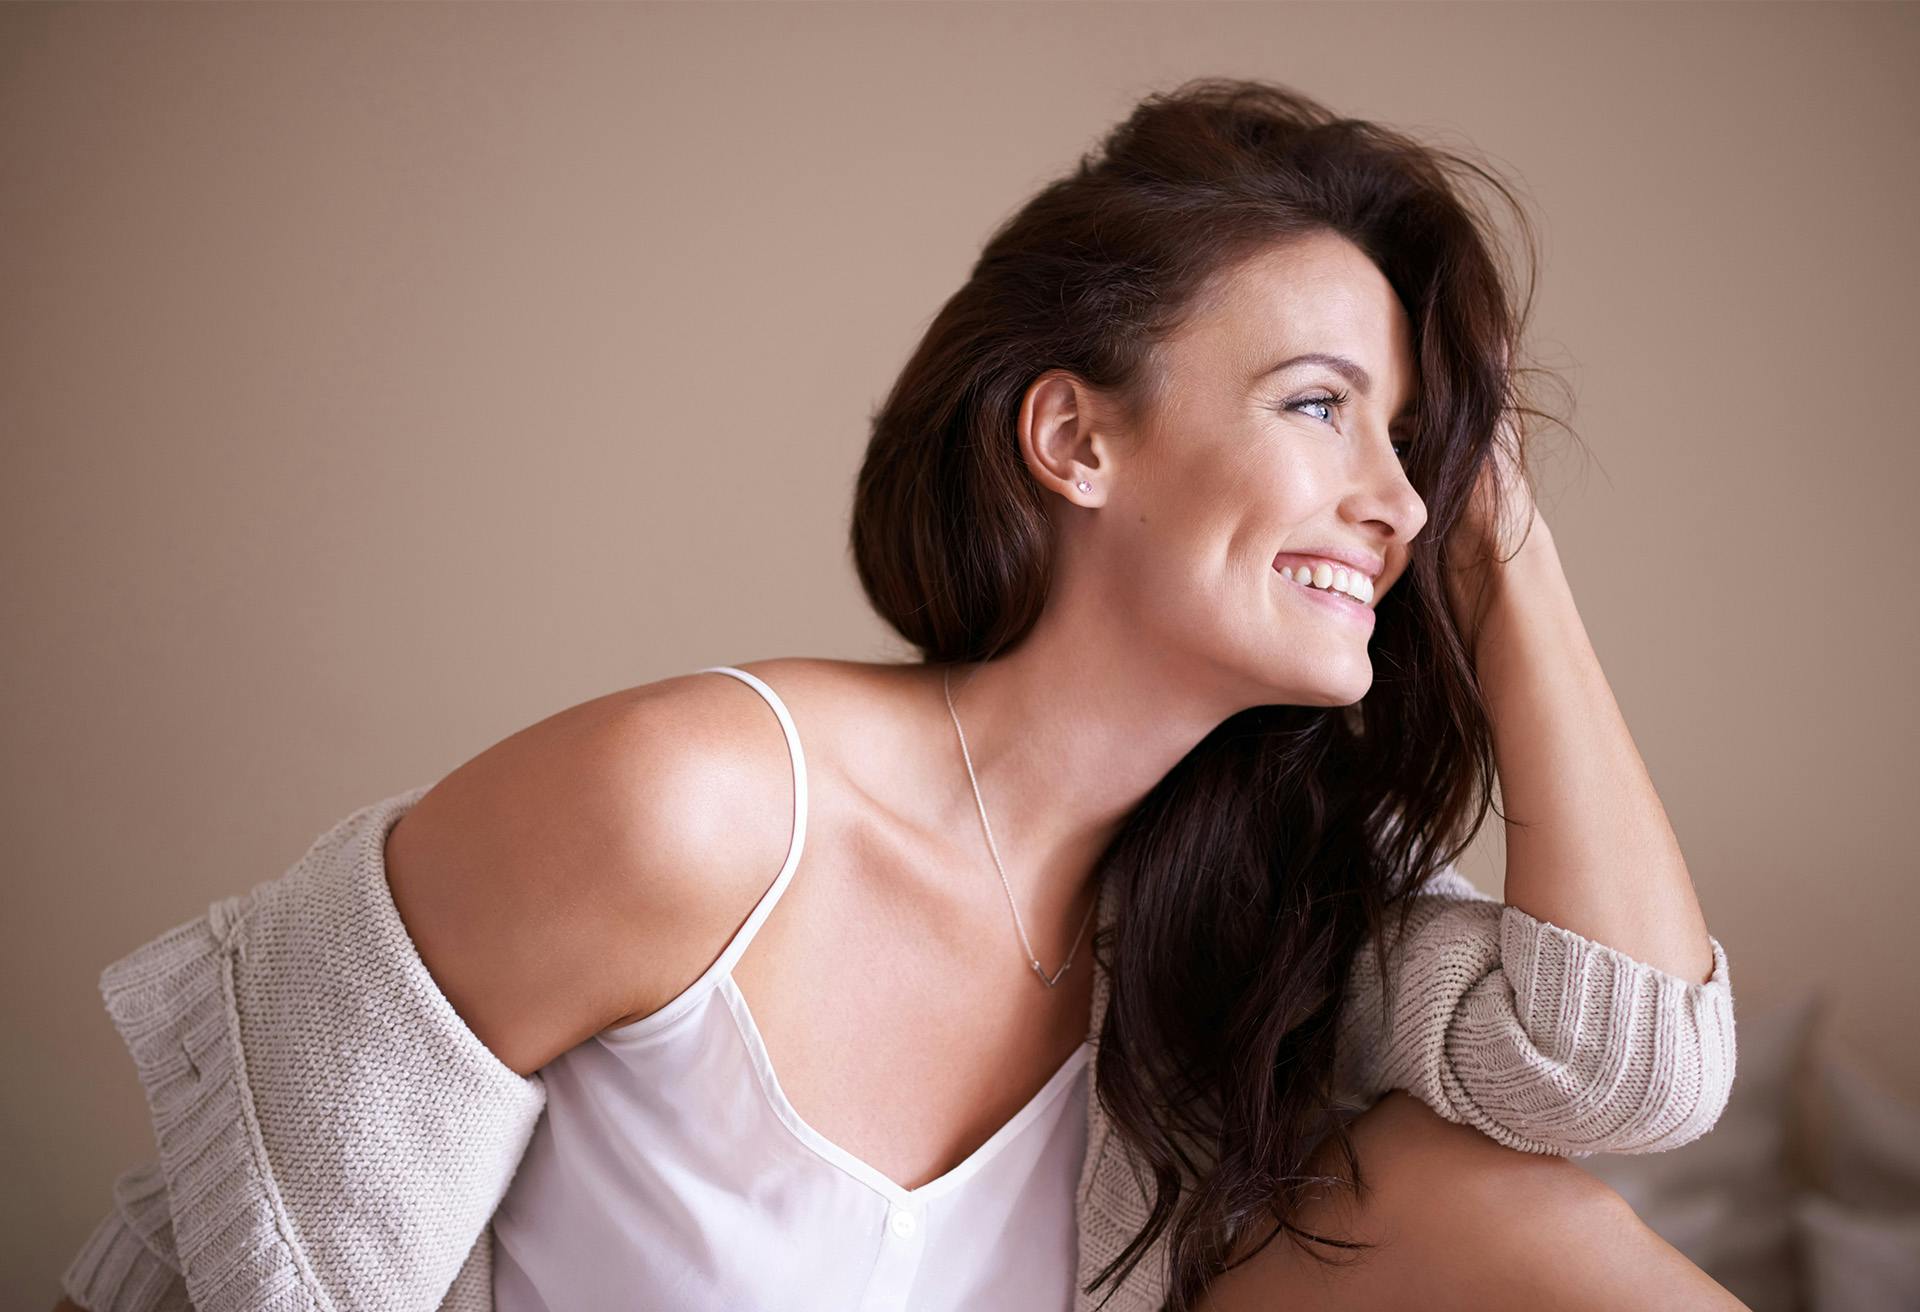 Woman holding her hair and smiling looking to the side.